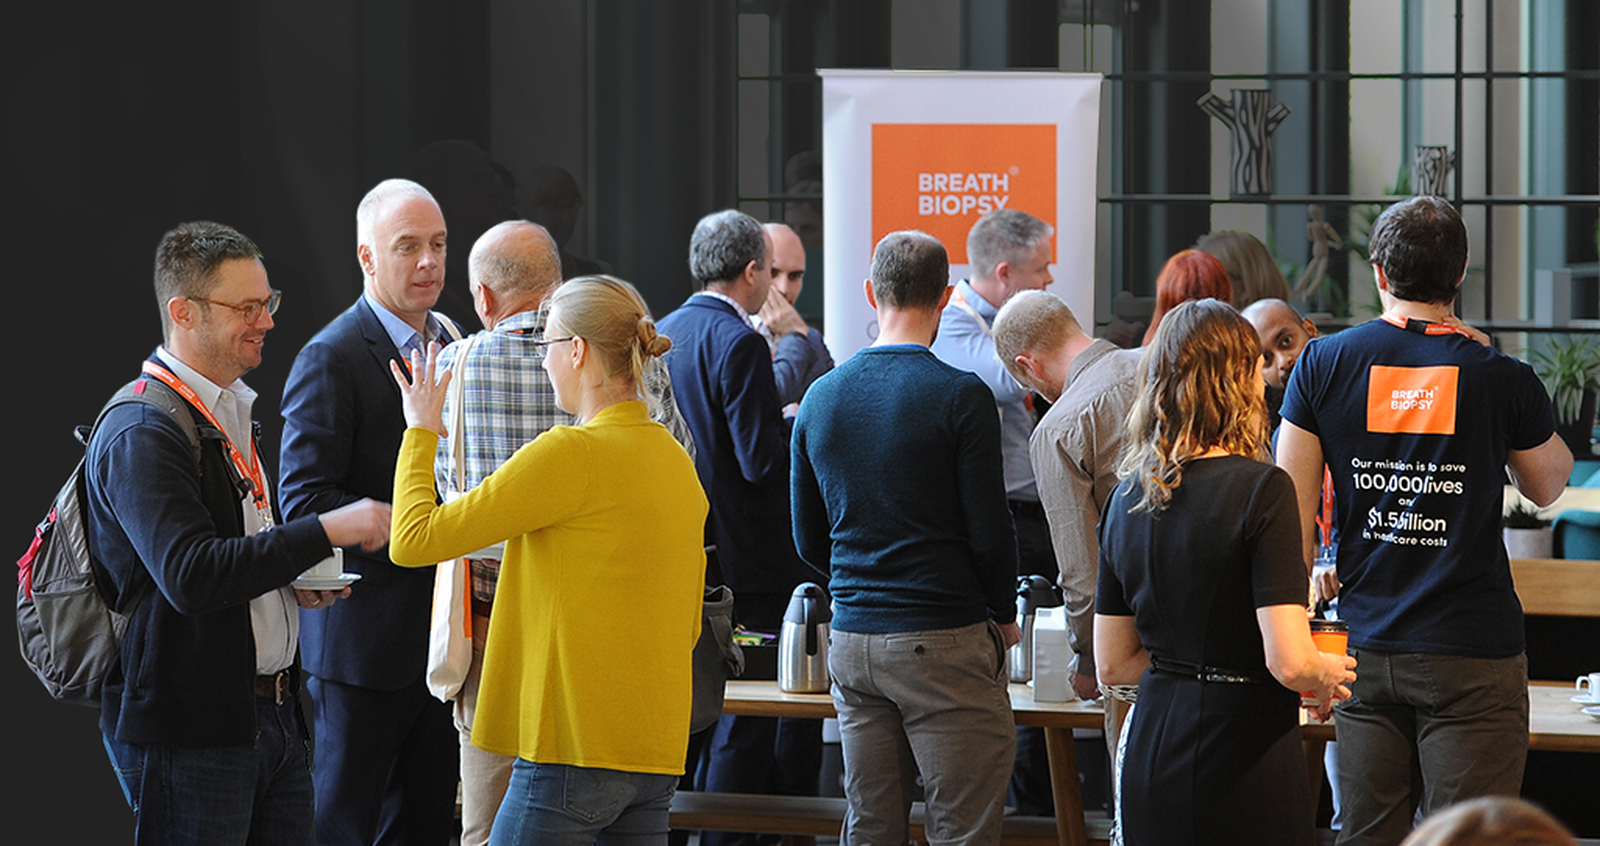 People at the Breath Biopsy Conference 2019